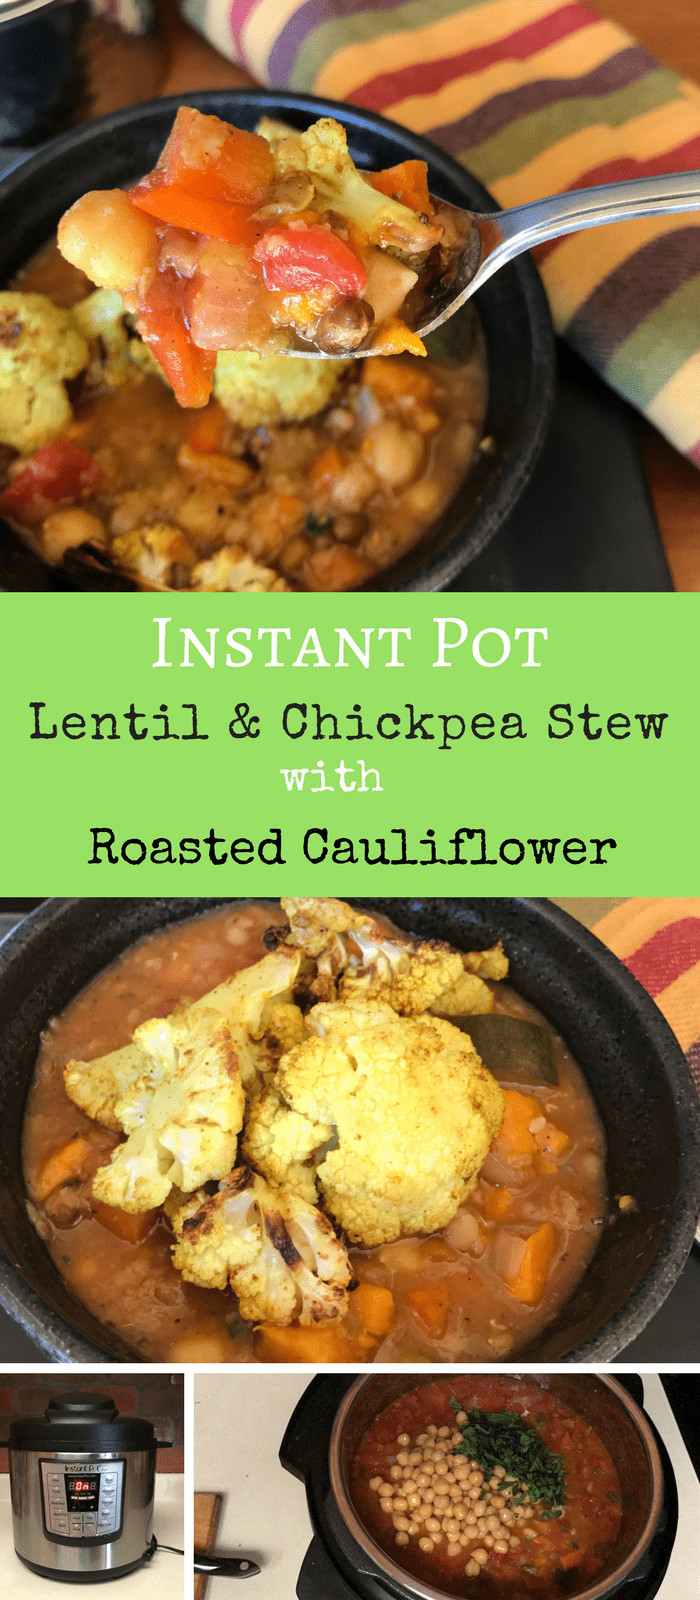 Instant Pot Whole Cauliflower
 Lentil and Chickpea Stew with Roasted Cauliflower